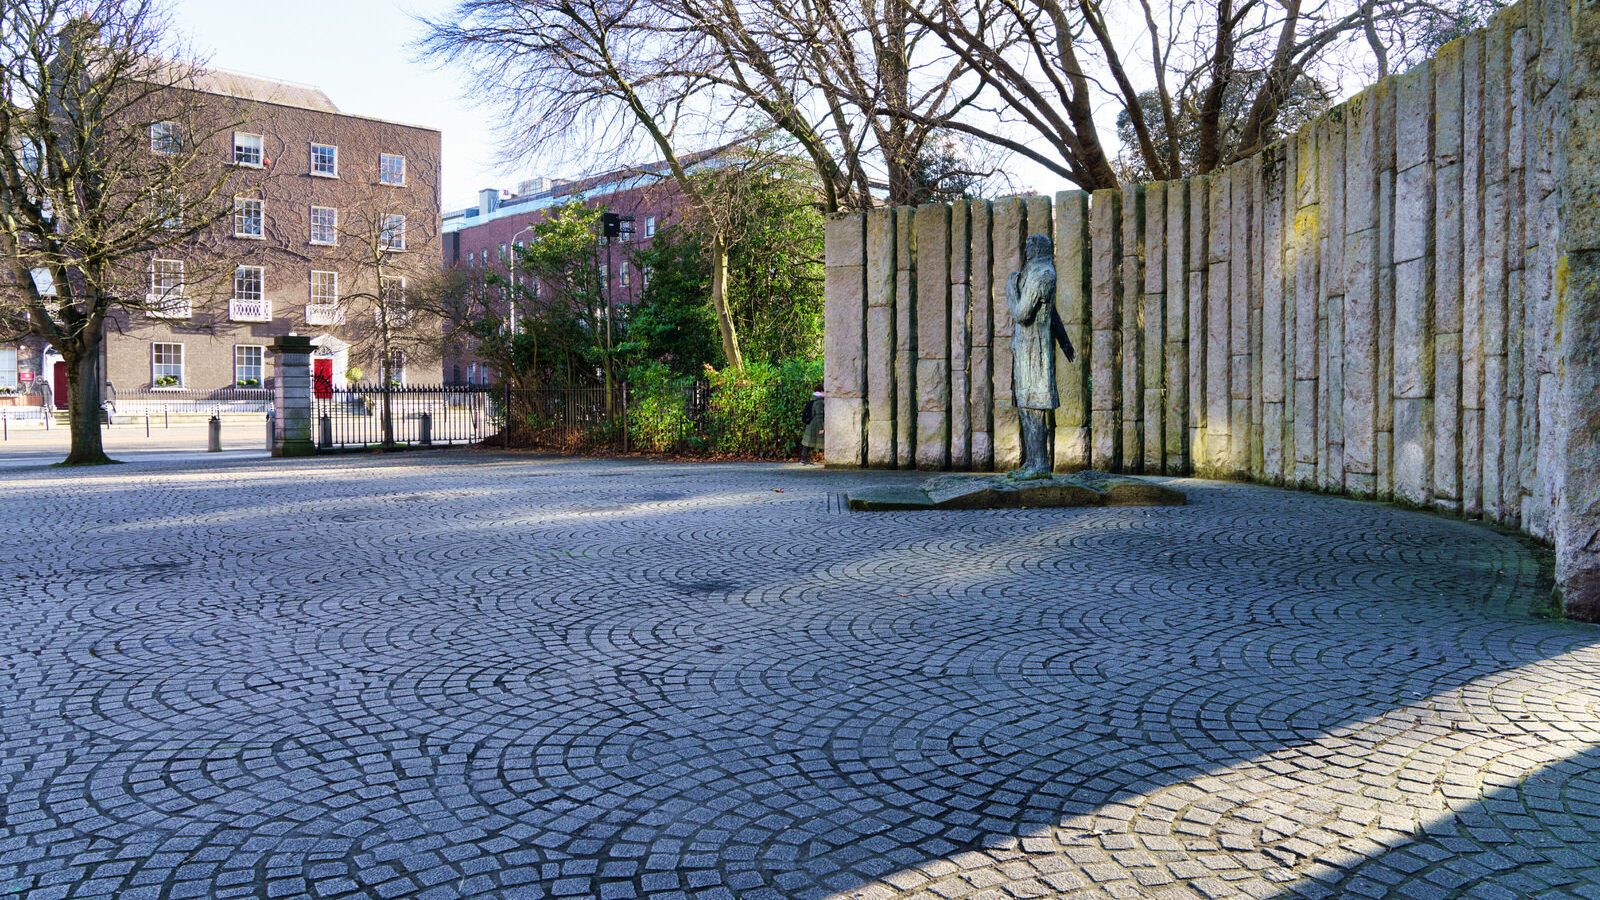 WOLFE TONE BY EDWARD DELANEY [I LIKE THE SETTING AT THE CORNER OF STEPHEN'S GREEN]-228103-1